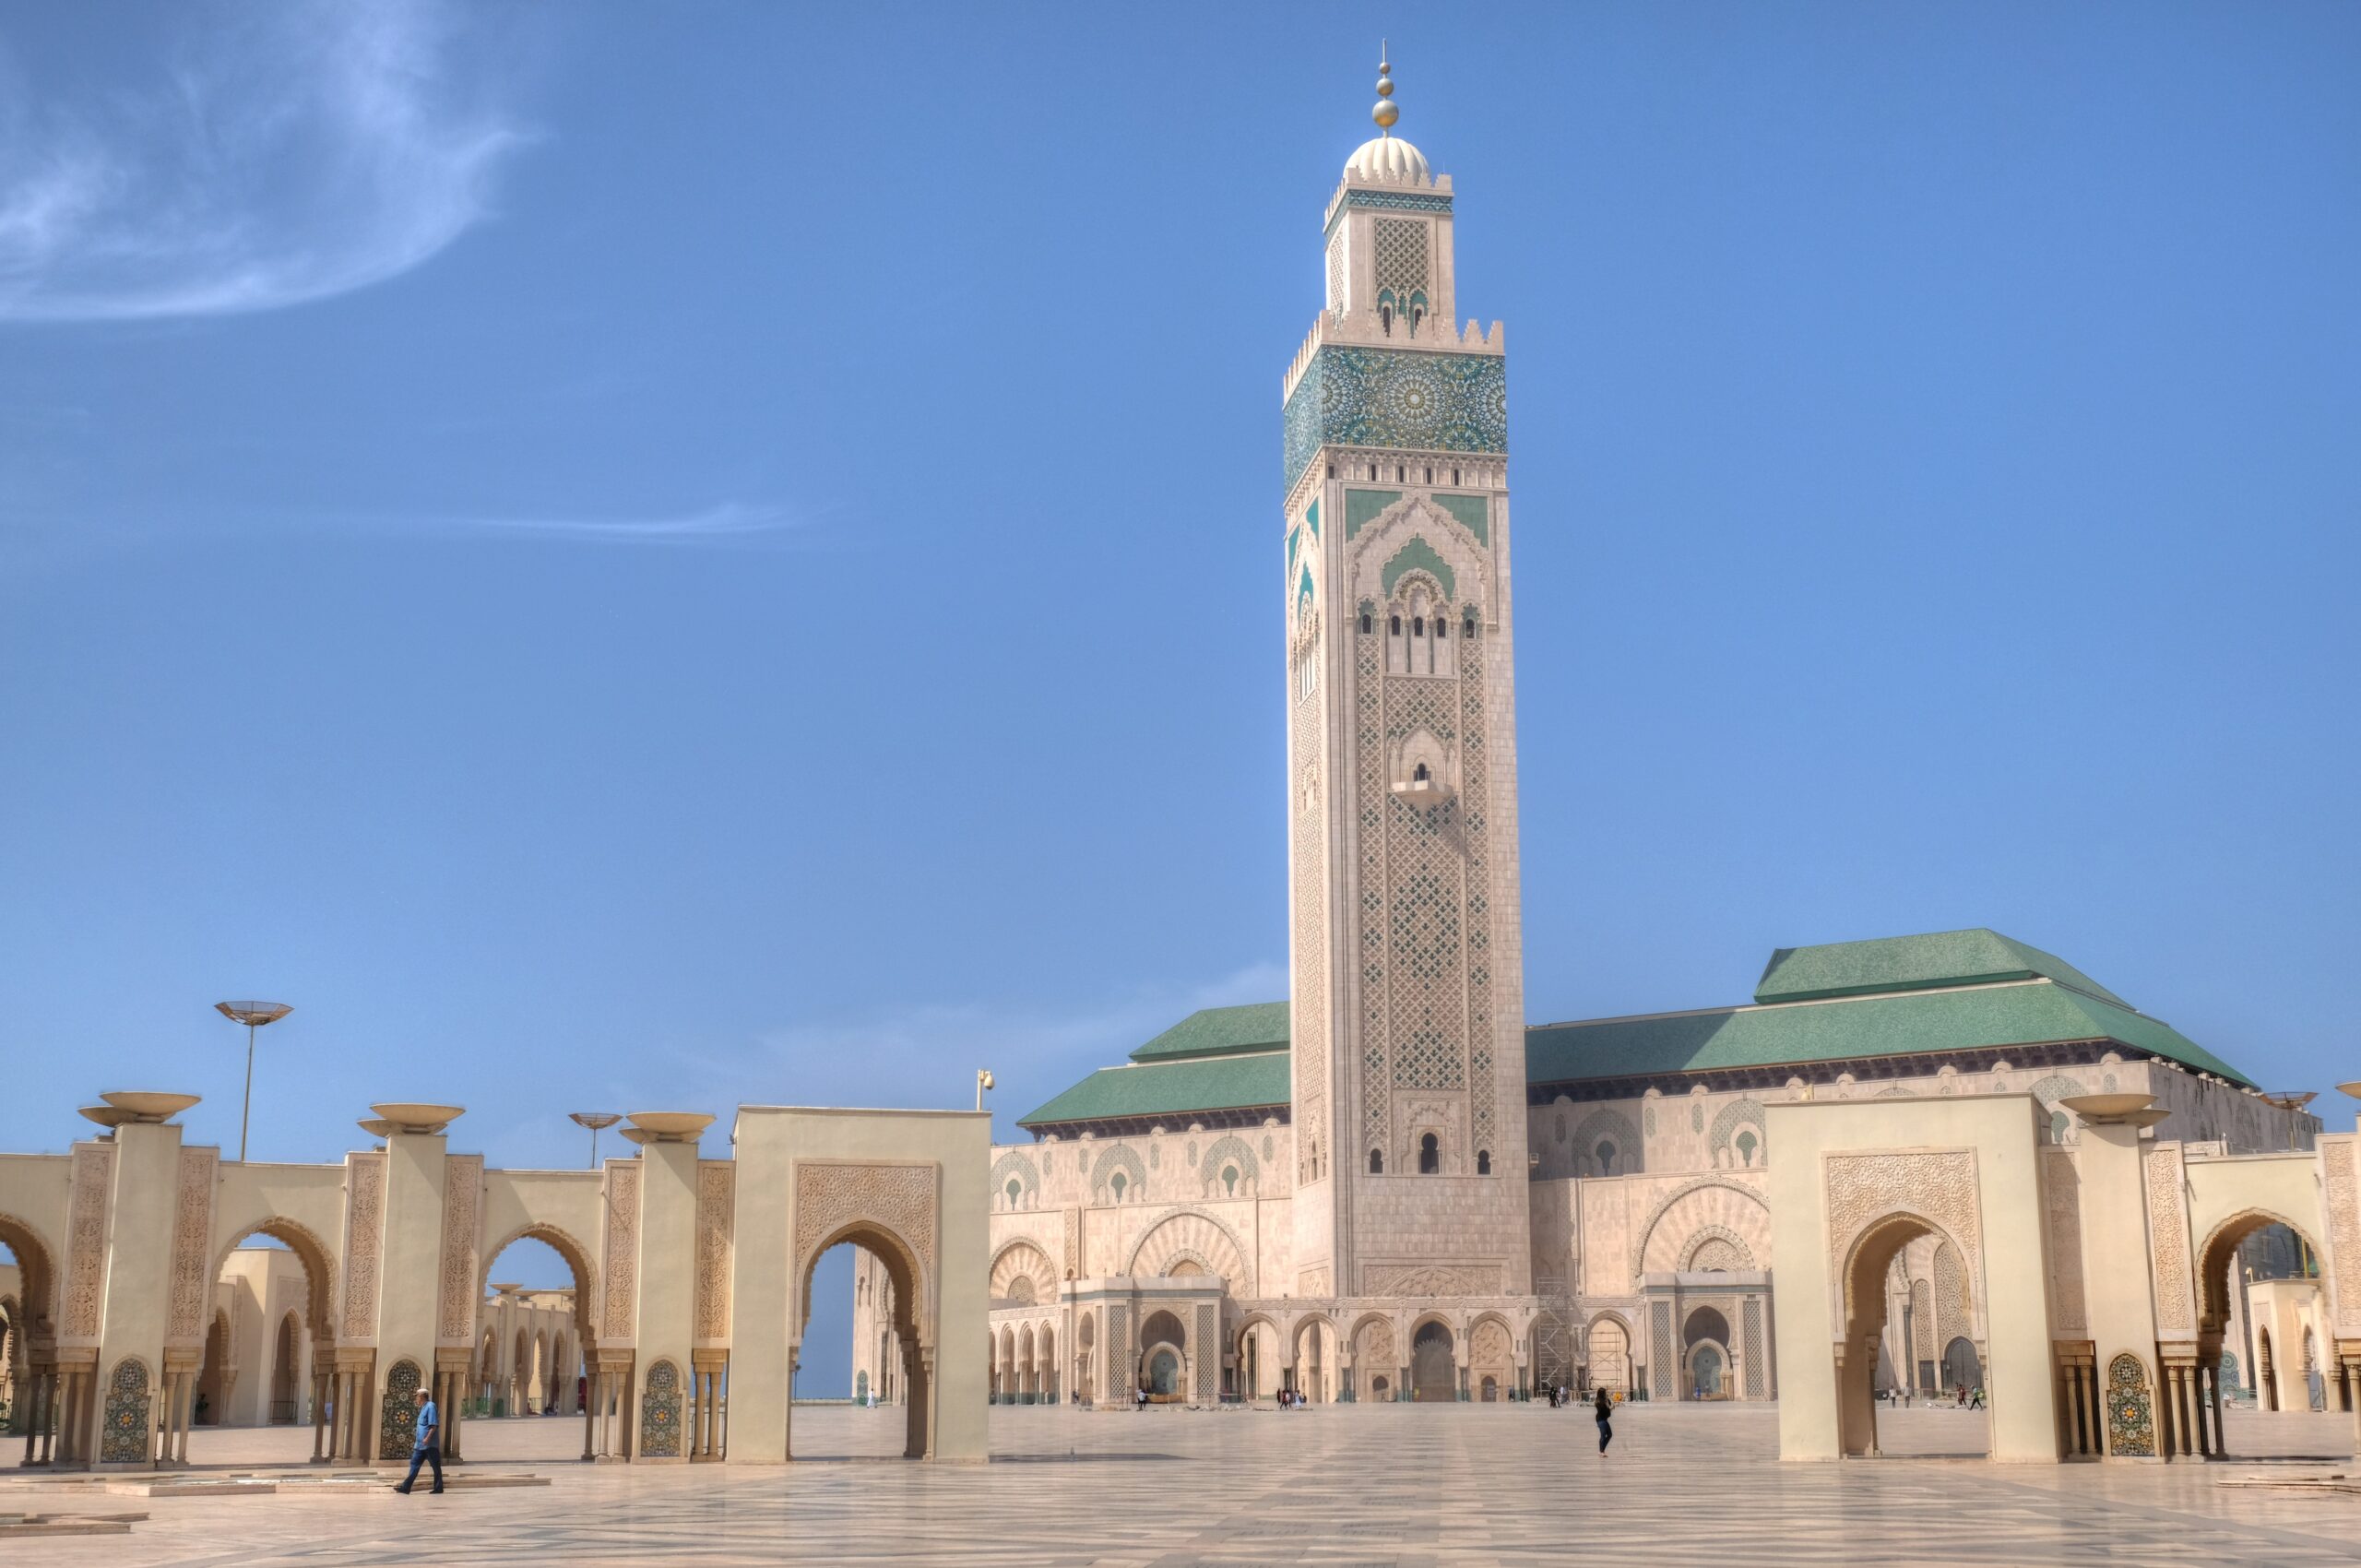 A beautiful mosque in Casablanca, one of the most beautiful hidden gems in Morocco.